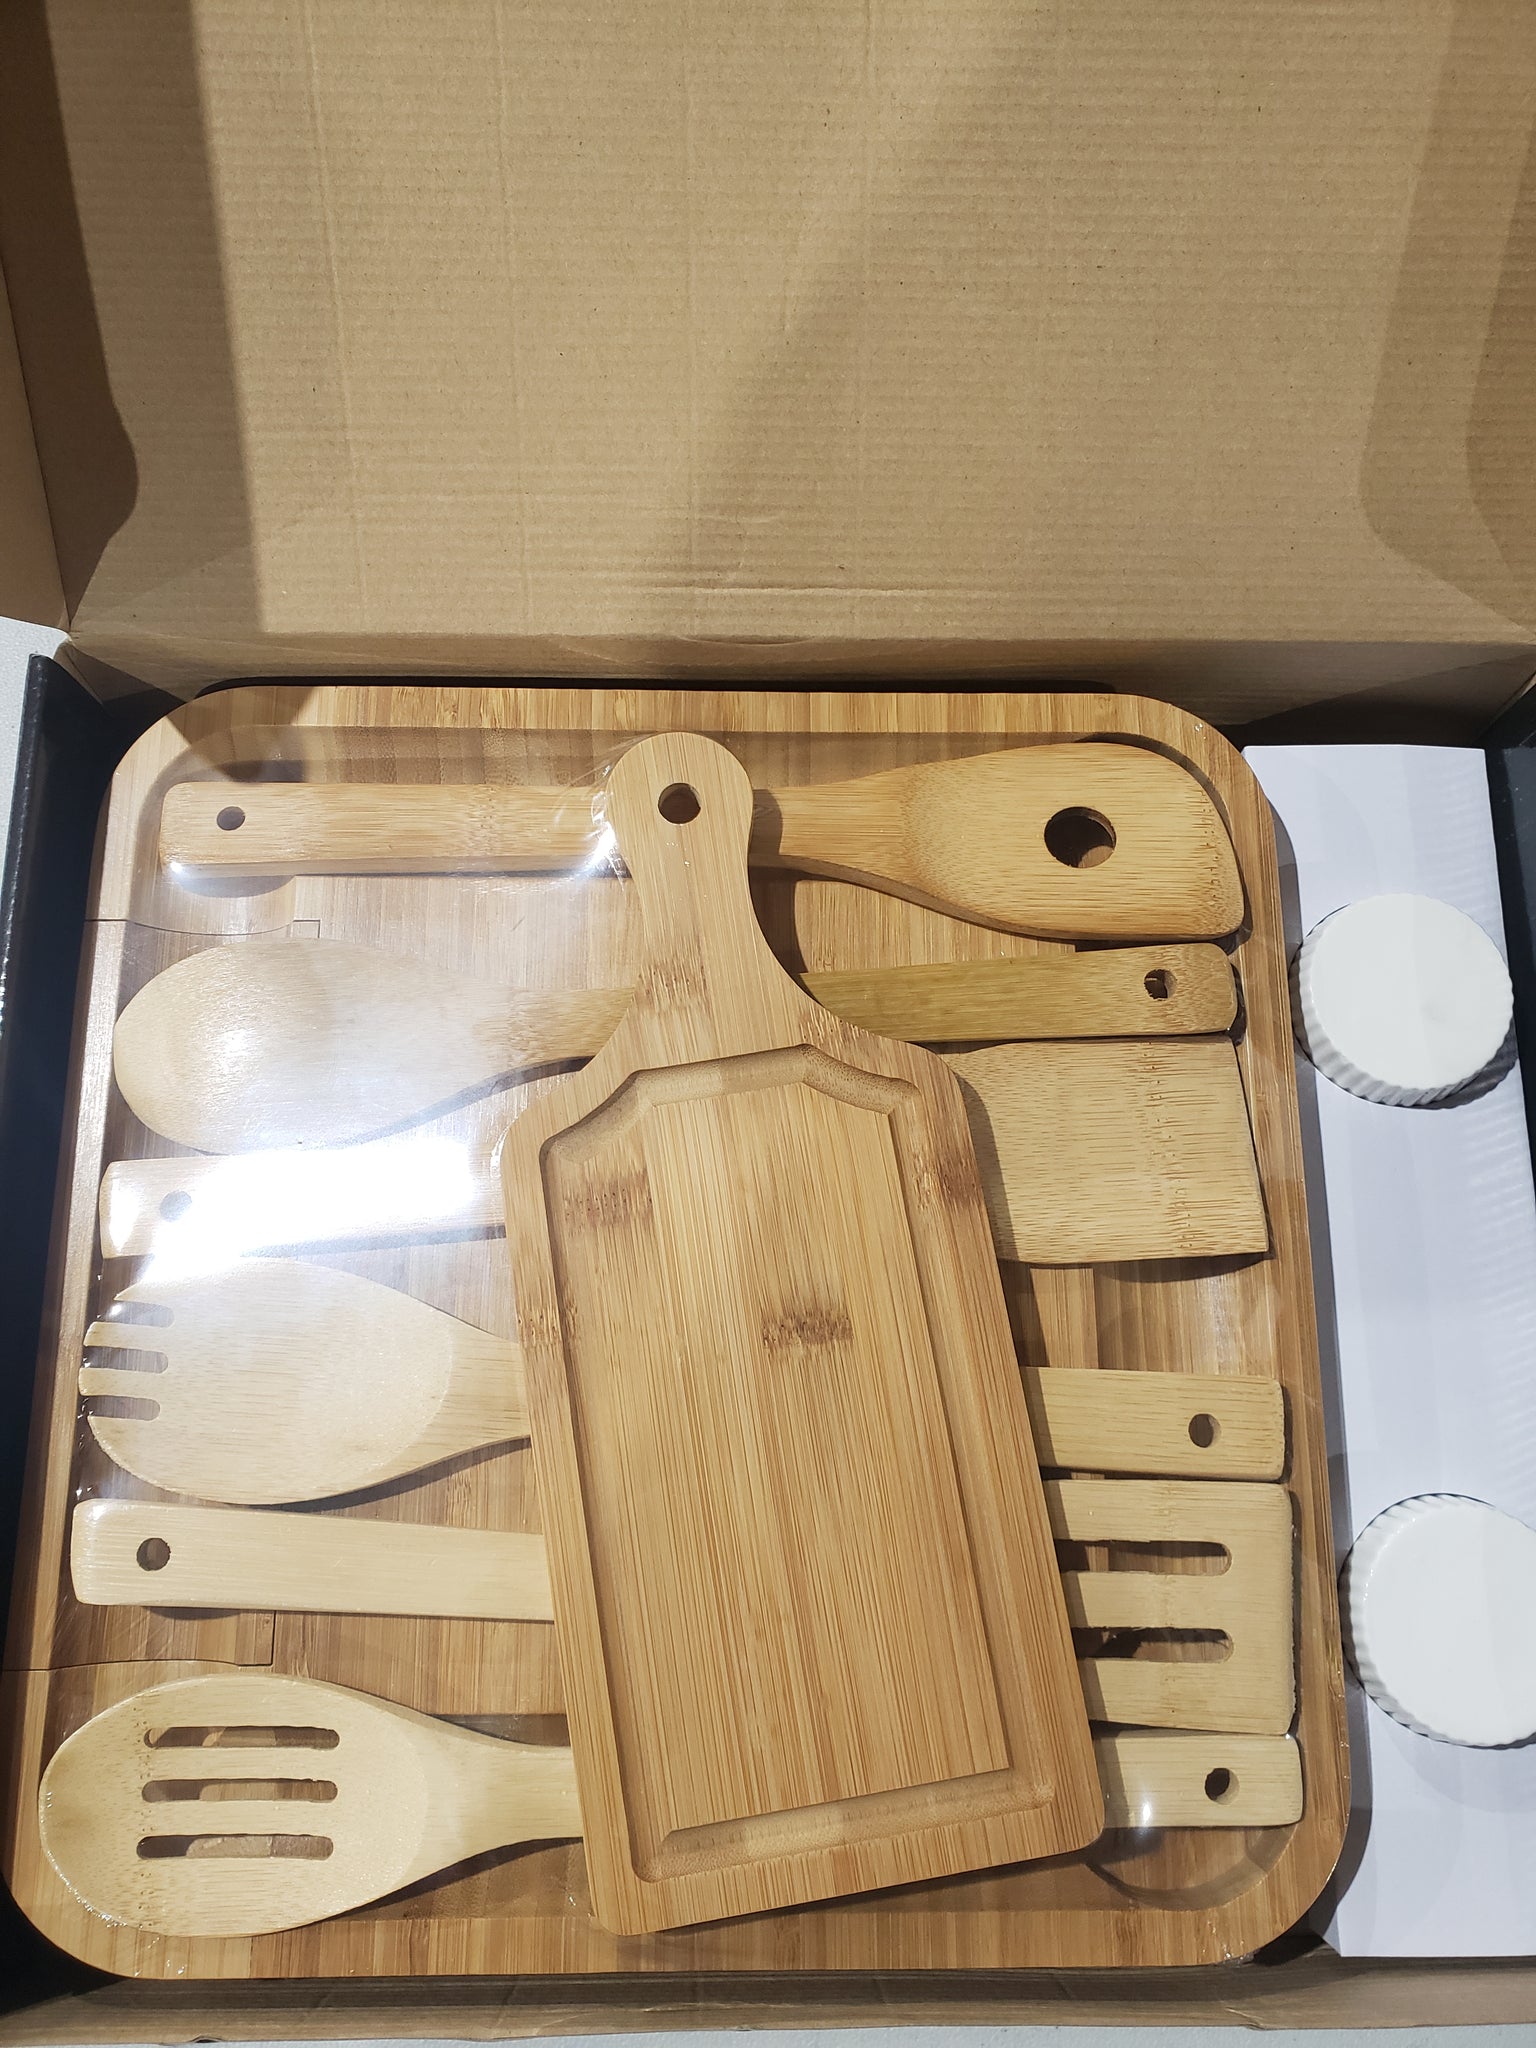  Smirly Bamboo Cutting Boards for Kitchen - Wood